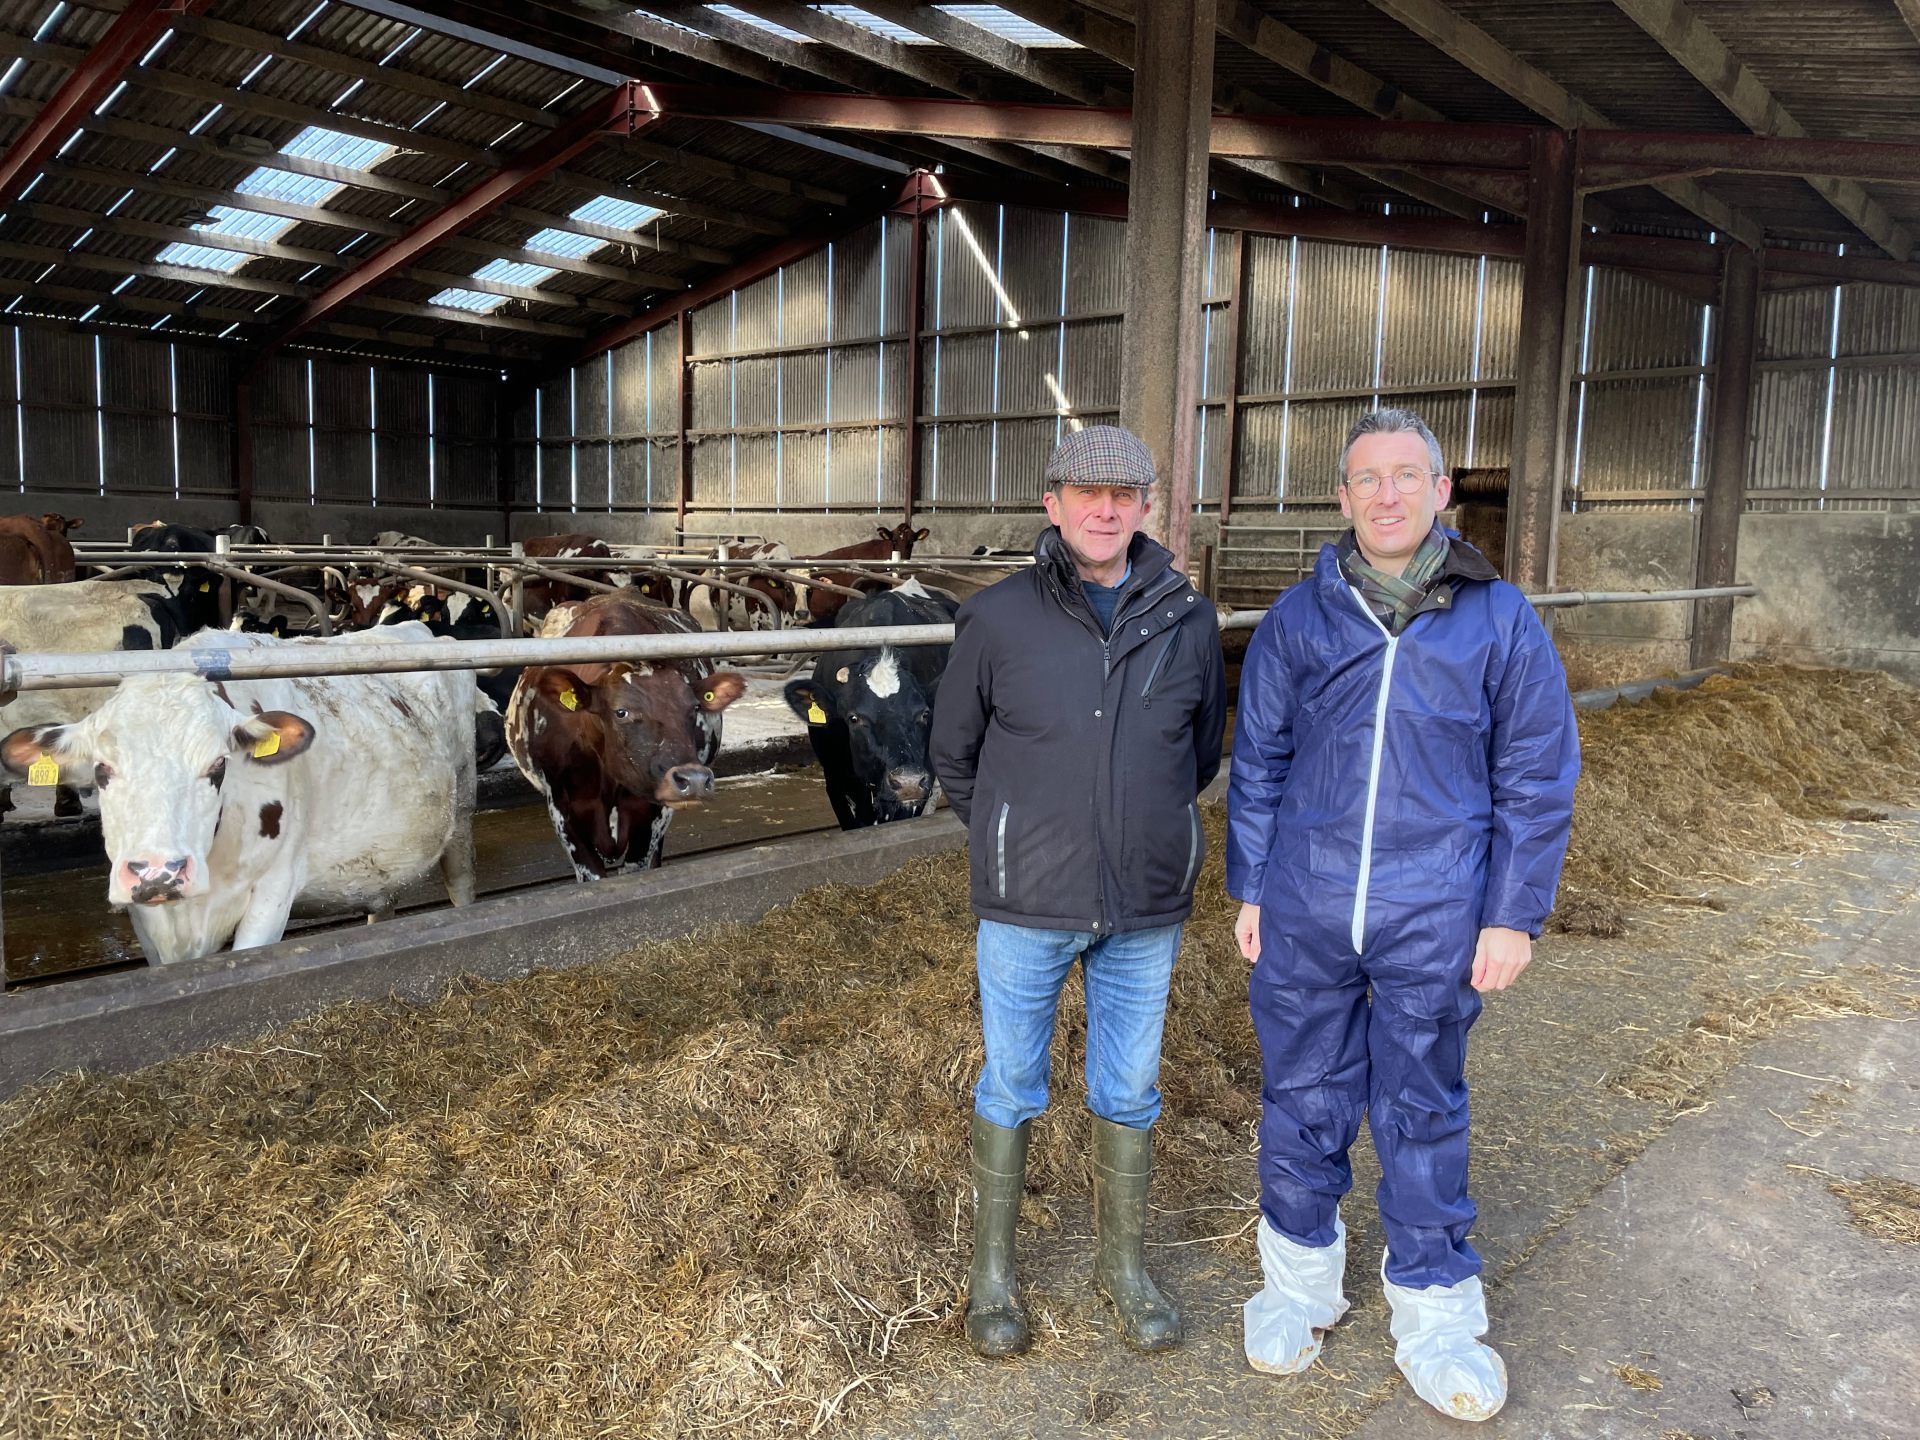 Dairy sector has great story to tell - Muir | Northern Ireland Executive